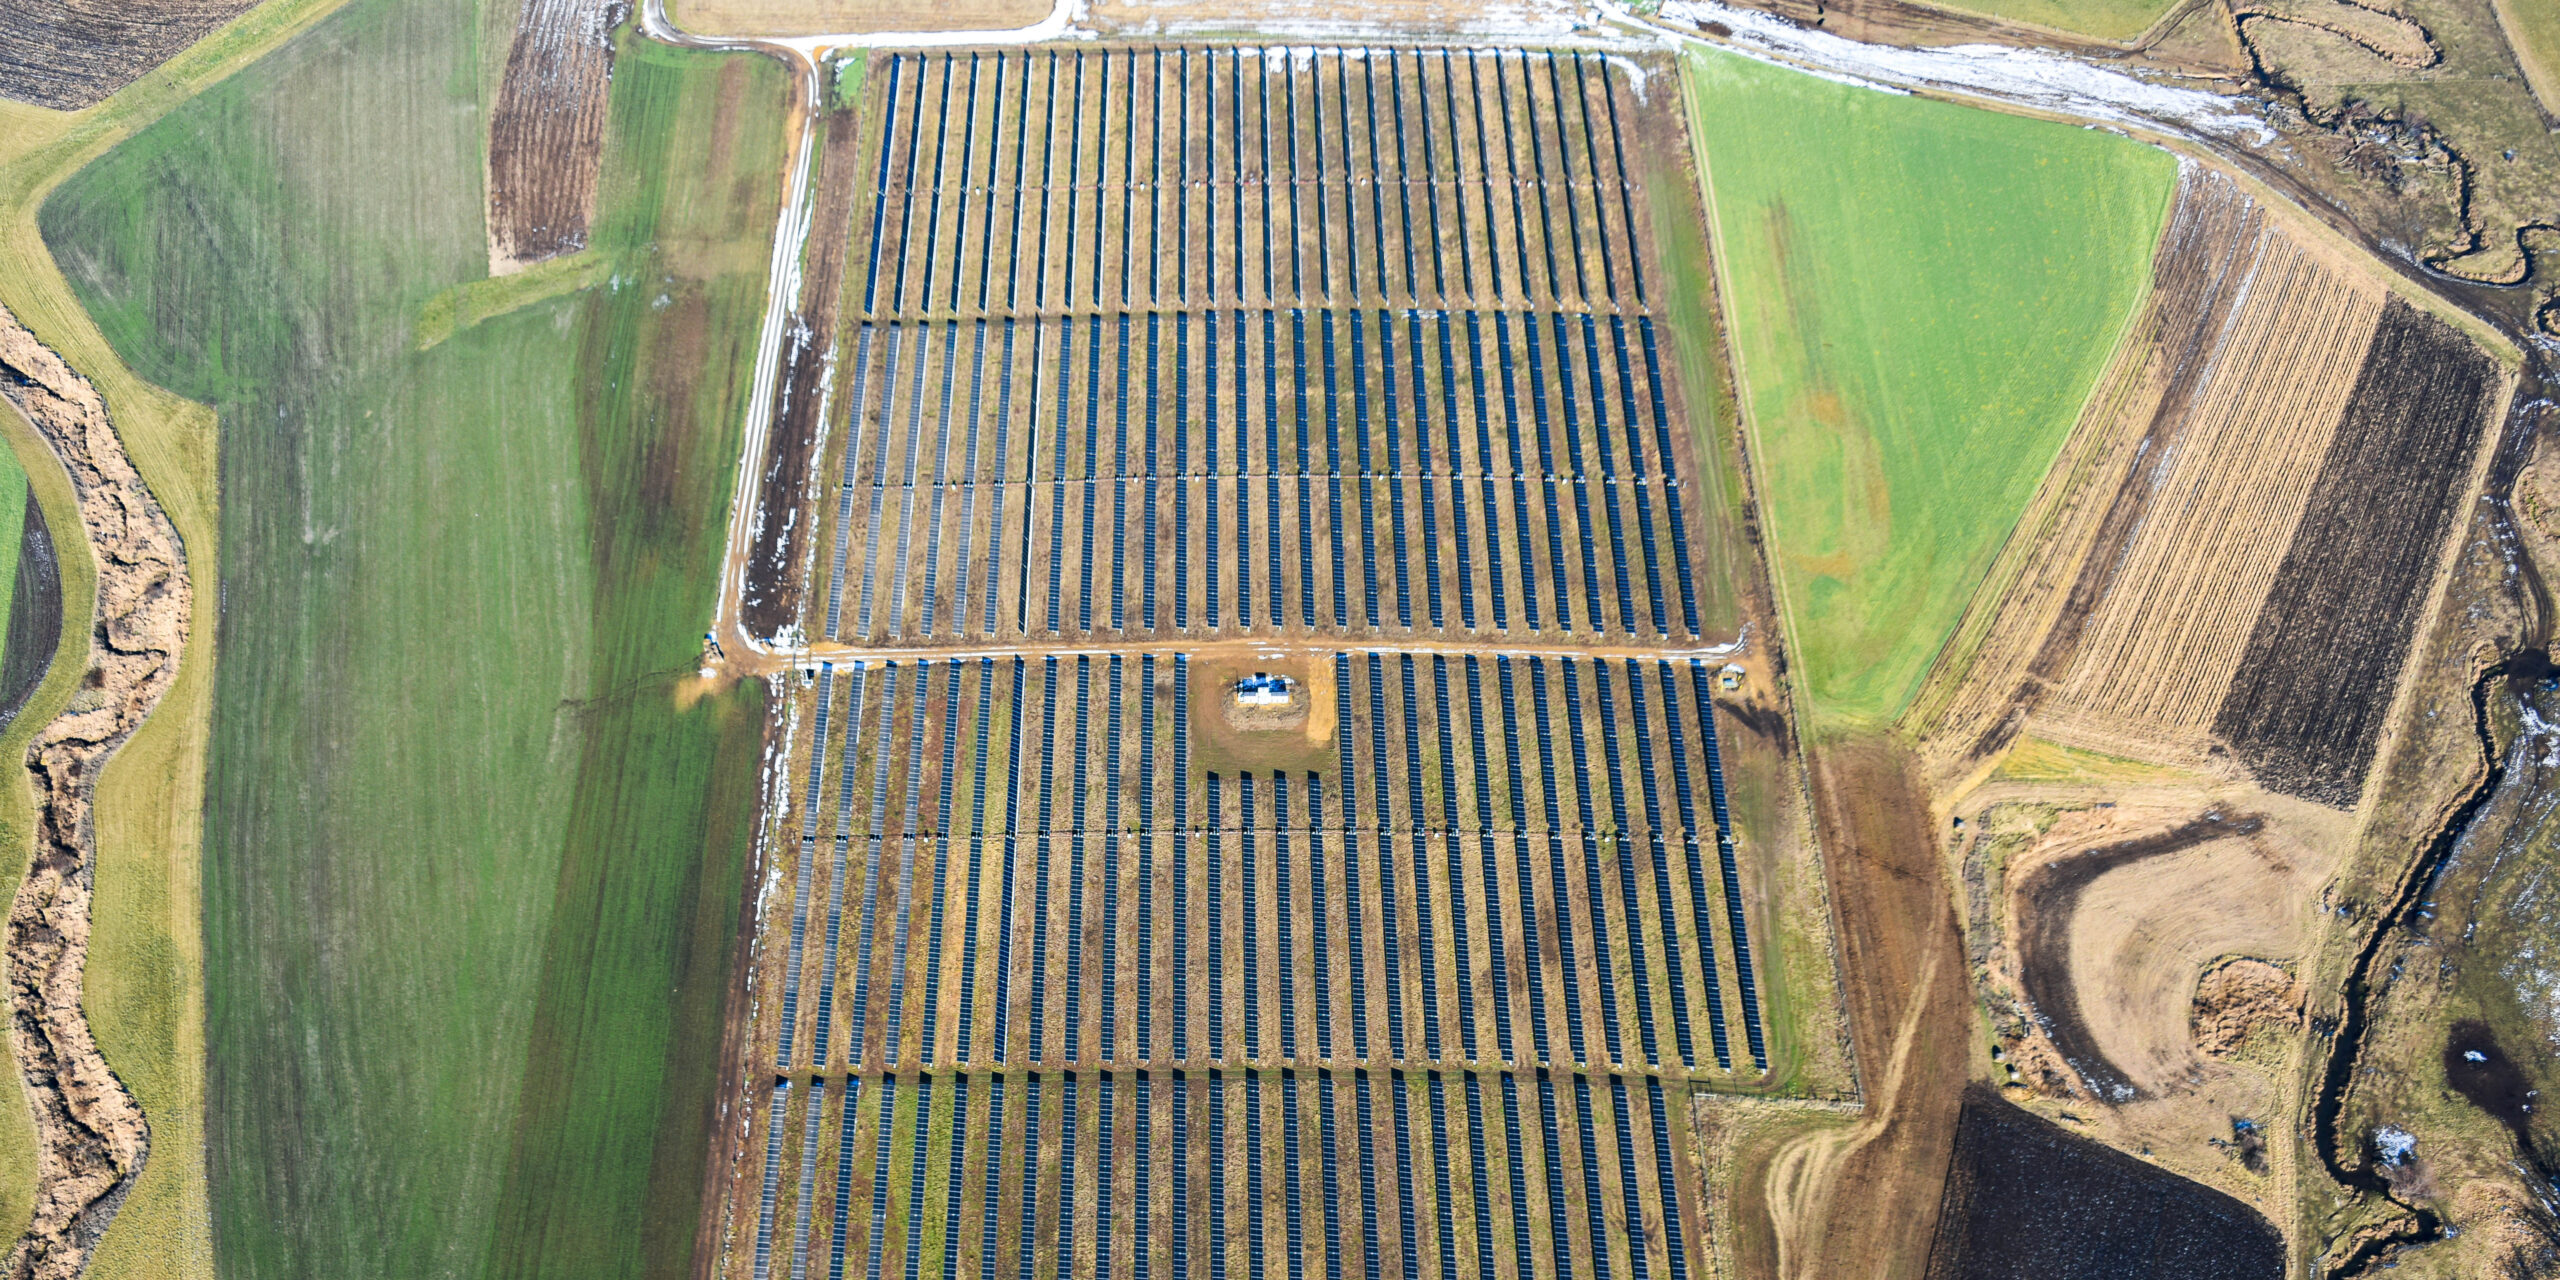 Aerial view of a rectangular grouping of solar panels near fields.